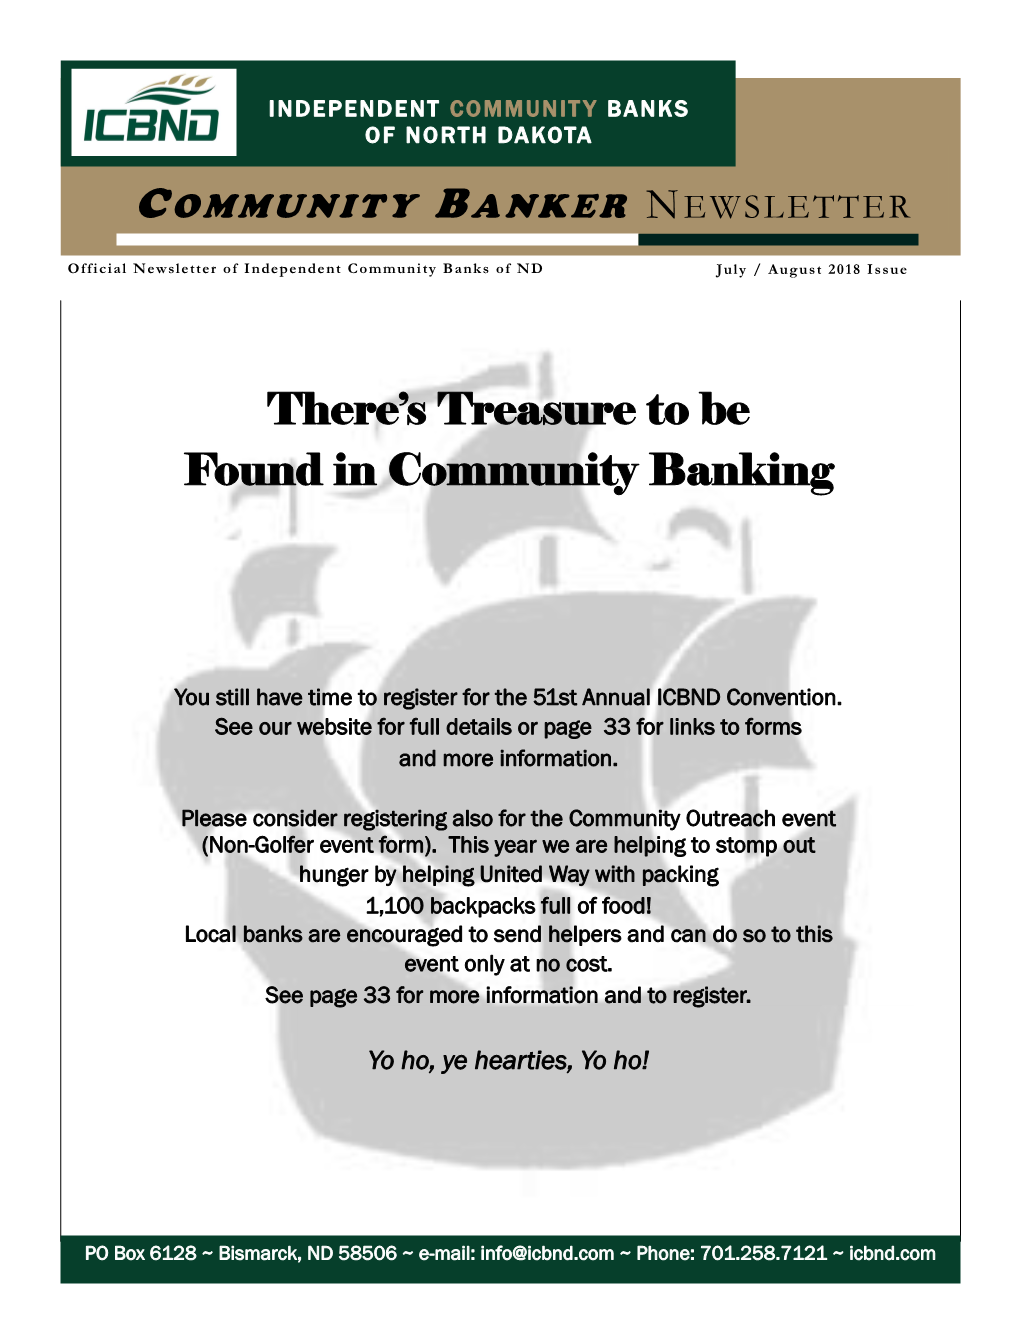 There's Treasure to Be Found in Community Banking